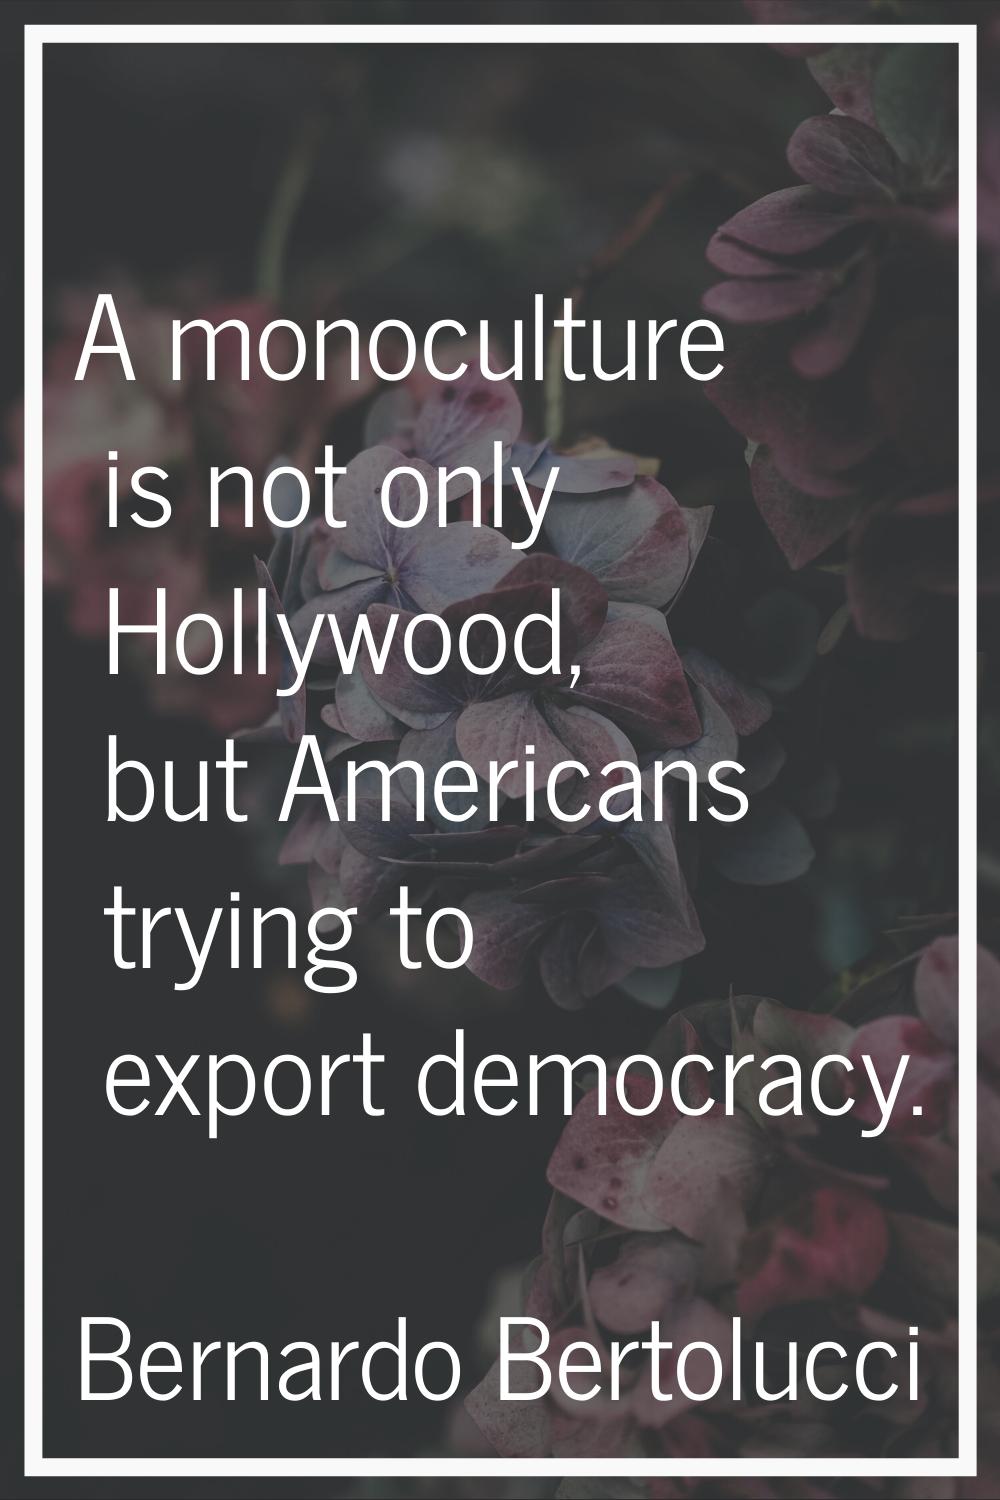 A monoculture is not only Hollywood, but Americans trying to export democracy.